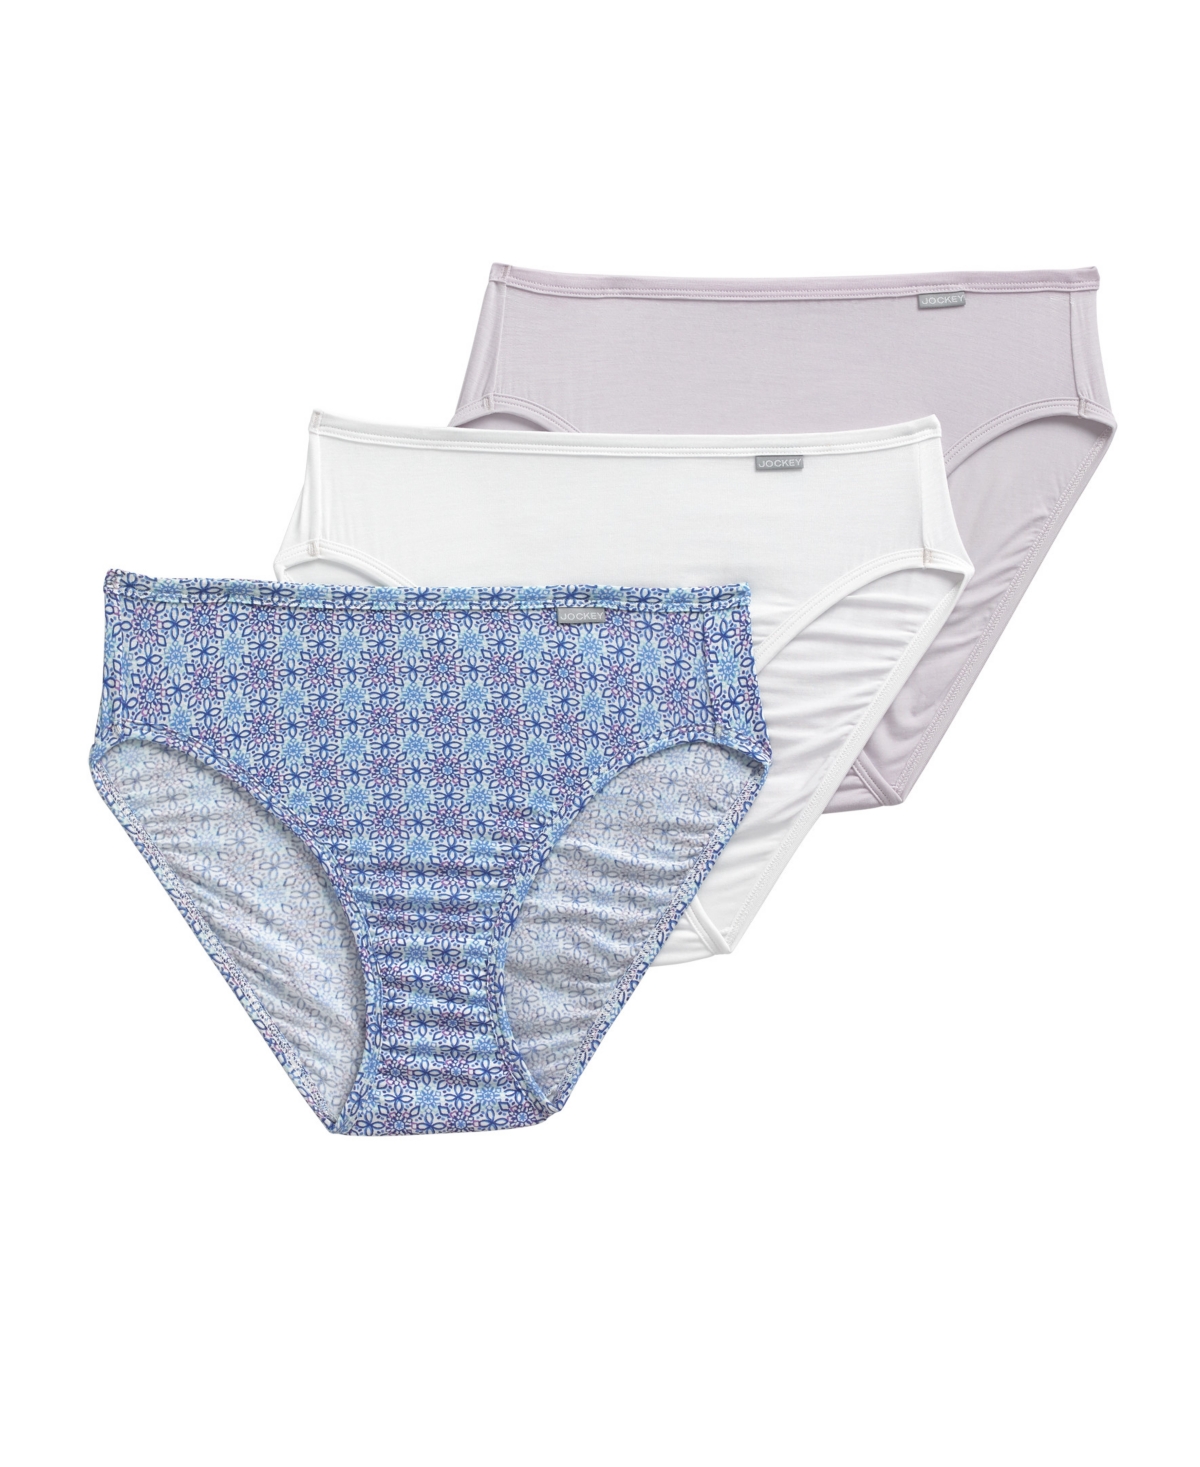 Jockey Elance Super Soft French Cut Underwear 3 Pack 2071 In Corchet Tile,soft Lilac,white